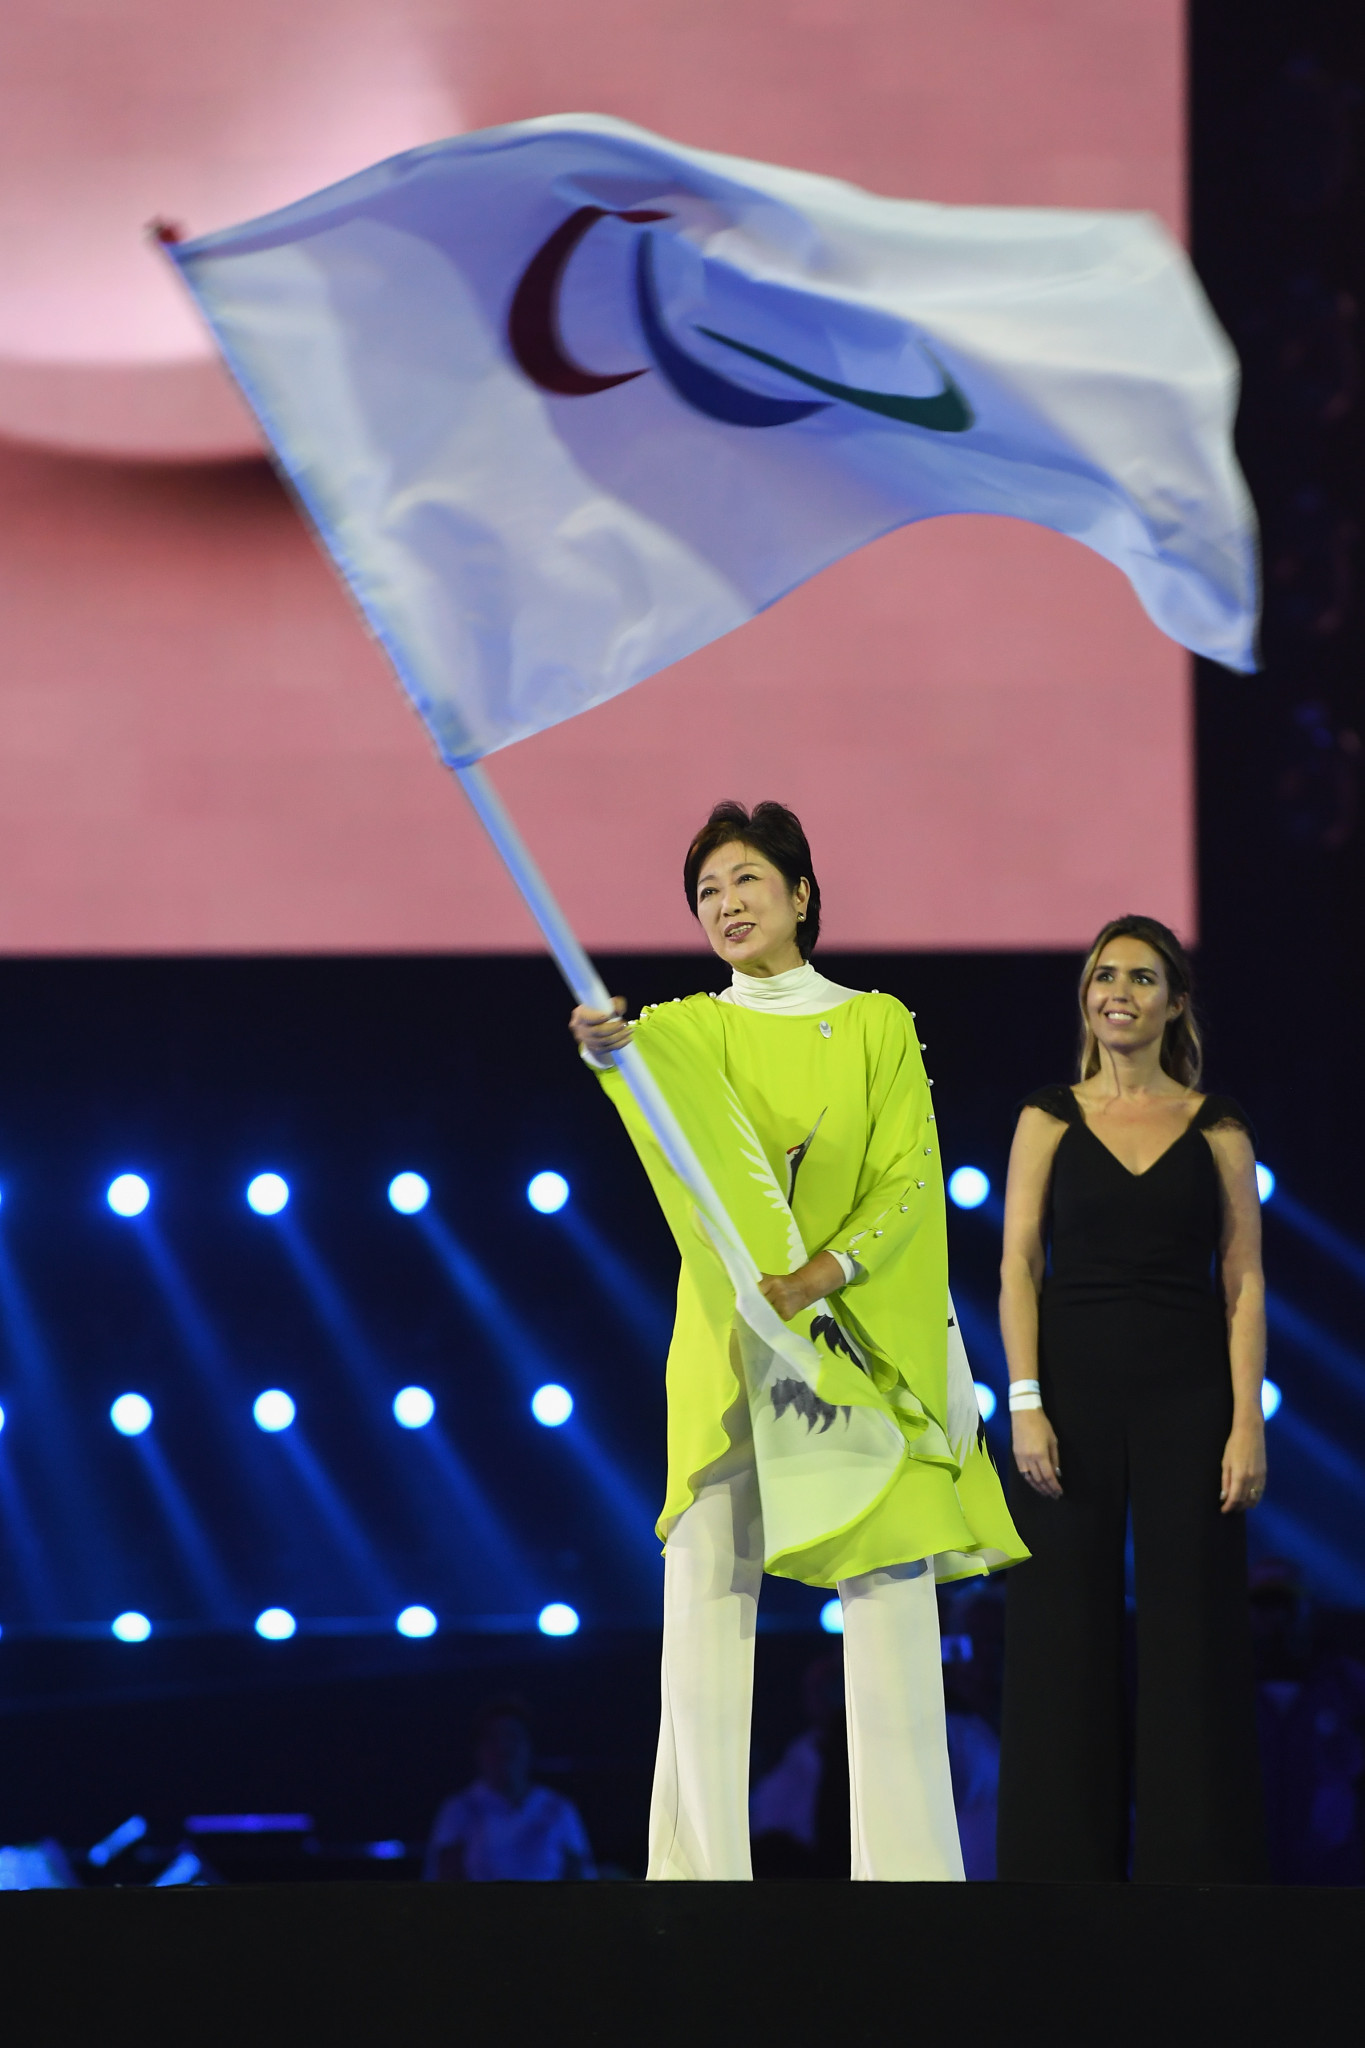 Tokyo’s Governor Yuriko Koike waves the IPC flag during the Closing Ceremony of the Rio 2016 Paralympic Games ©Getty Images